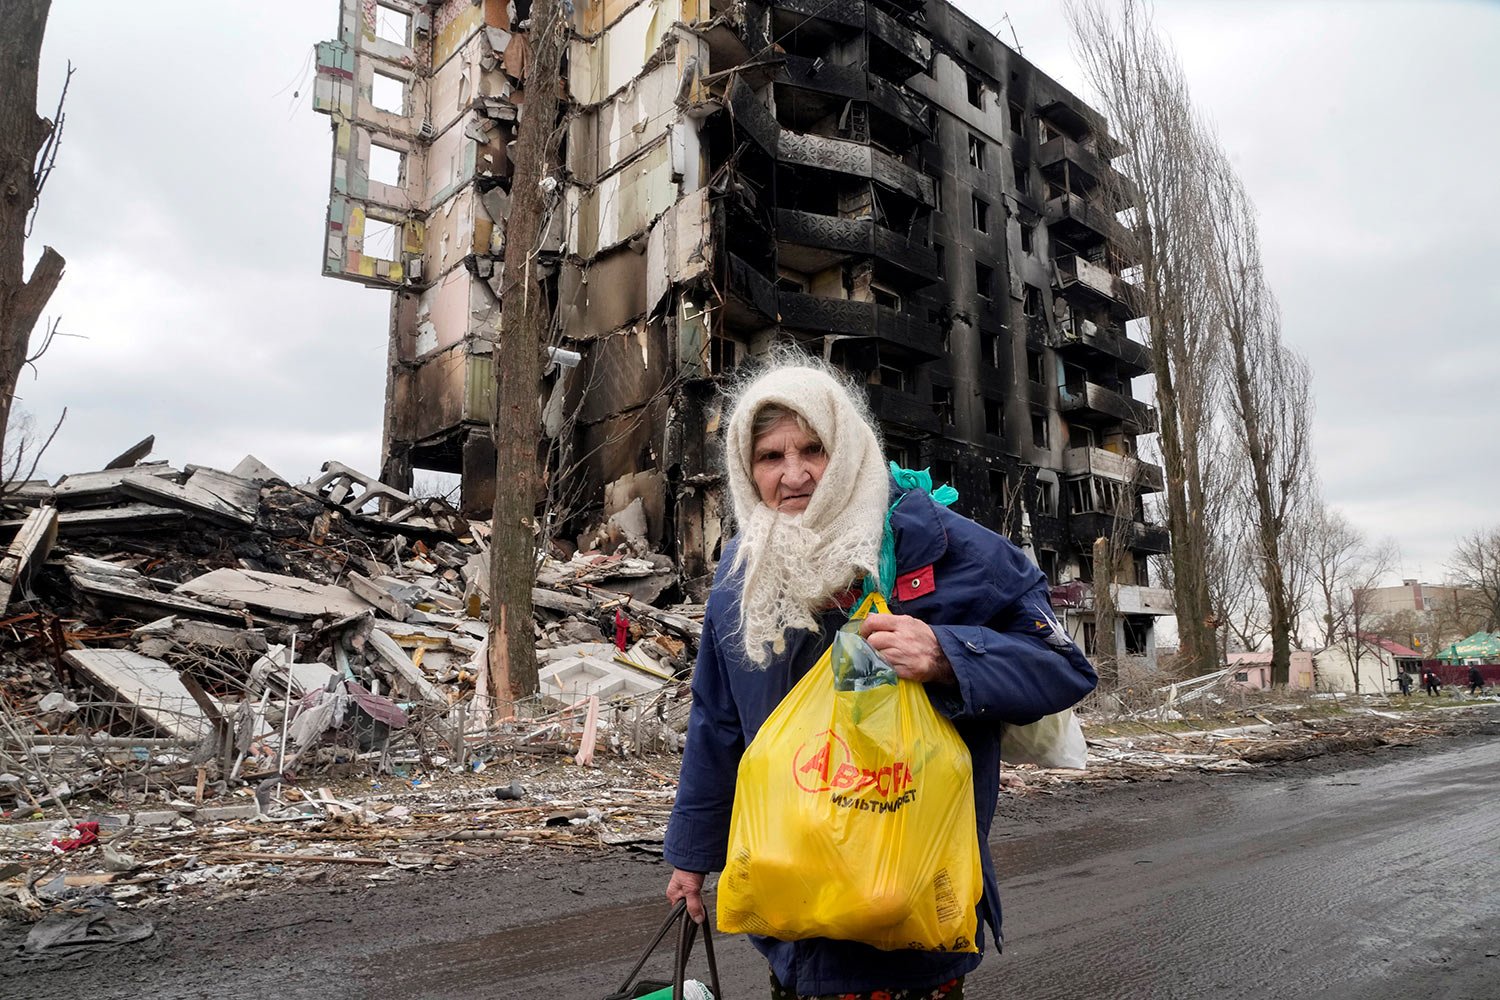  An elderly woman walks by an apartment building destroyed in the Russian shelling in Borodyanka, Ukraine, Wednesday, April 6, 2022. (AP Photo/Efrem Lukatsky) 